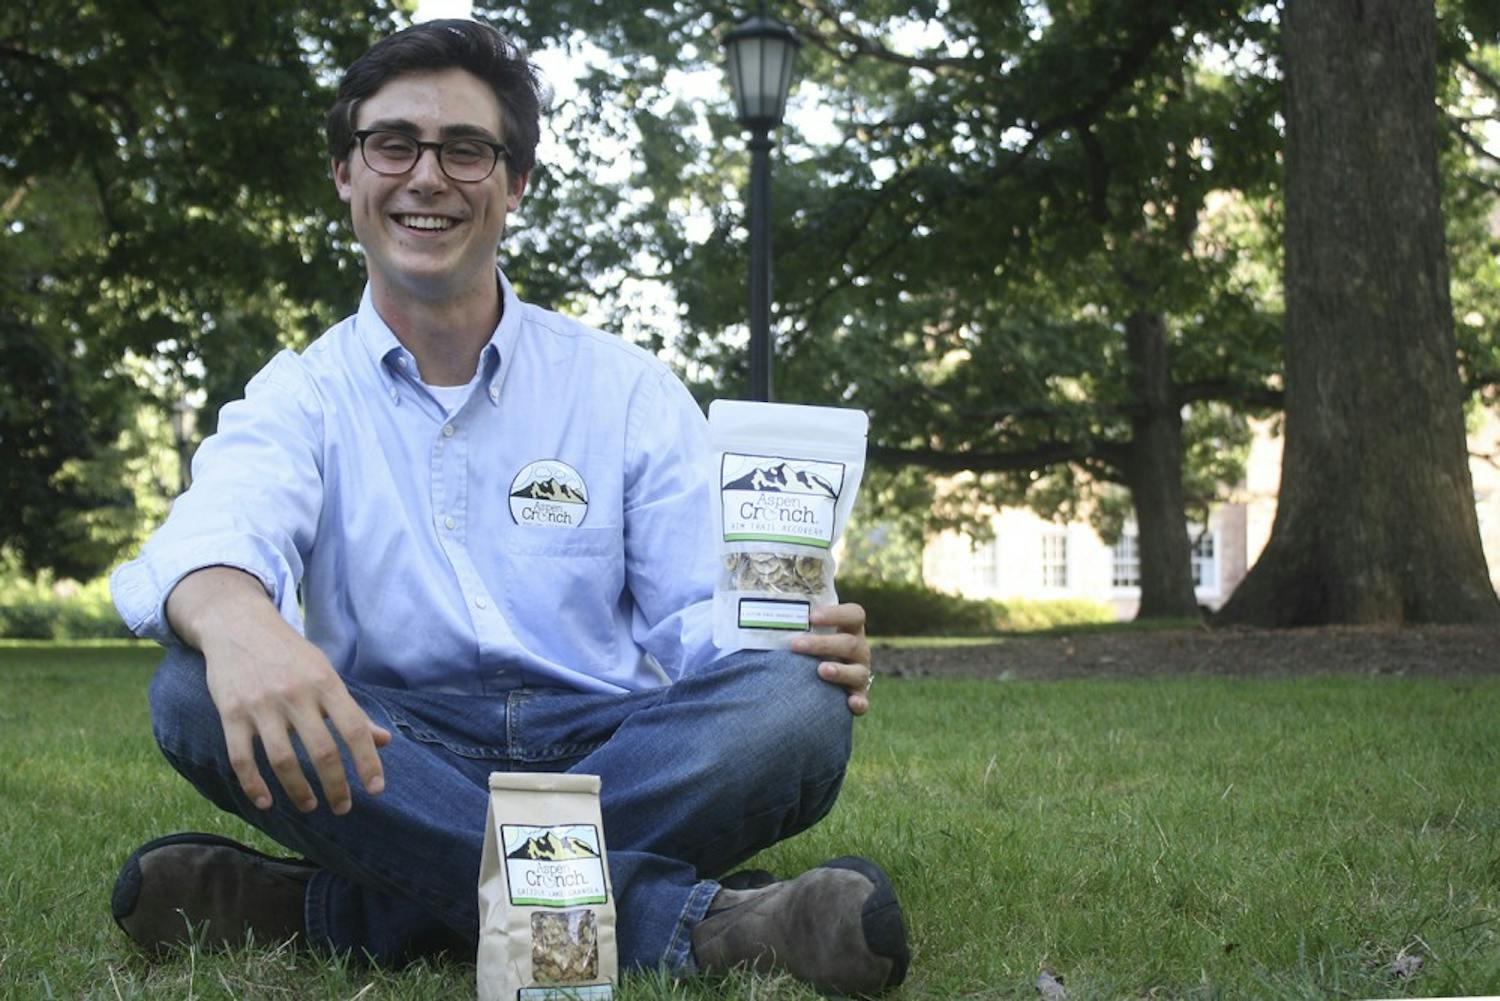 Jack Paley, a sophomore business major, created Aspen Crunch four years ago and it's still going strong. Mainly consisting of dried fruits, granola and other natural ingredients, Aspen Crunch can purchased online or in some farmers markets in Colorado. 